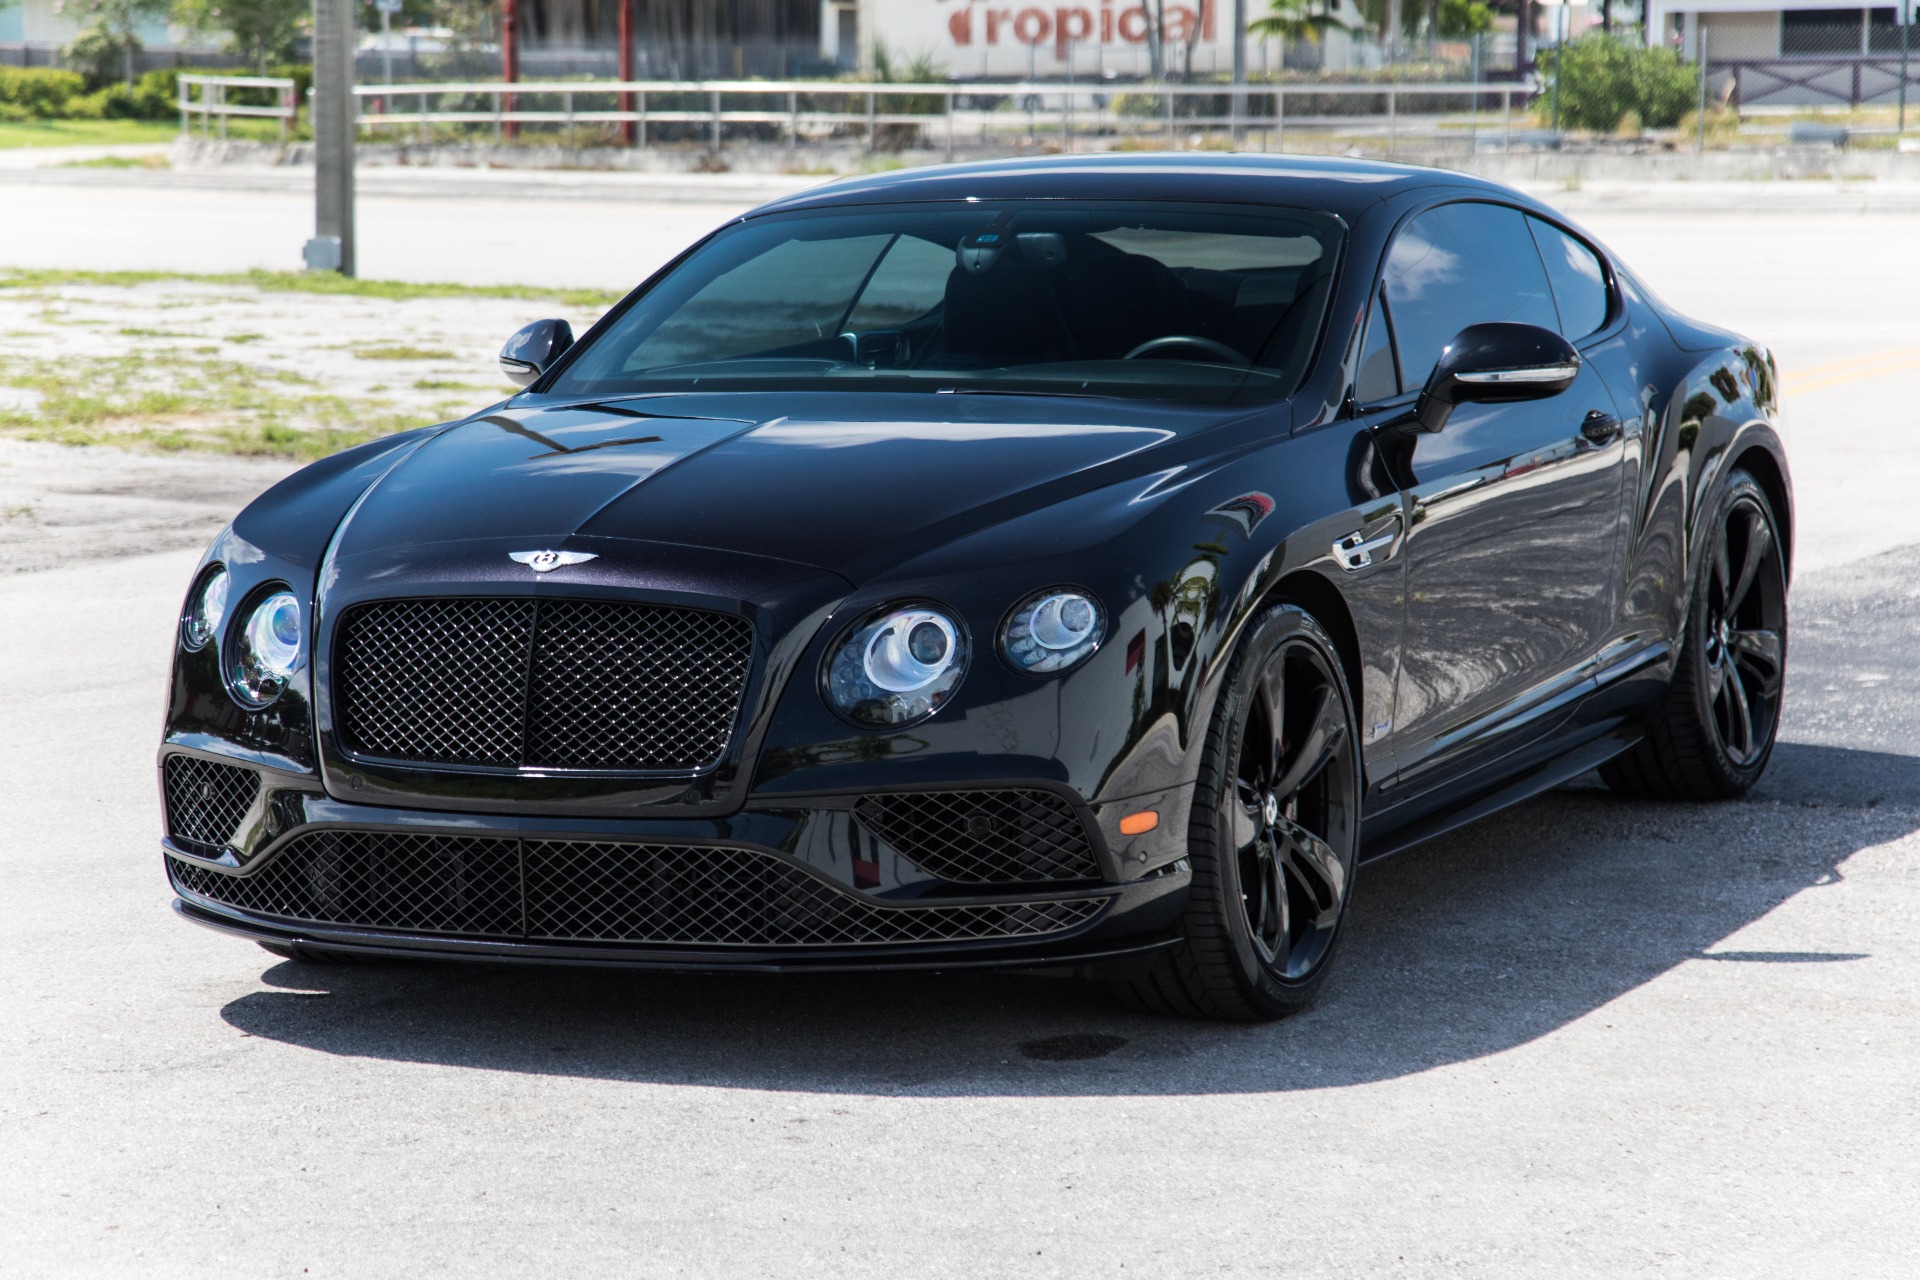 Used 2016 Bentley Continental GT Speed For Sale 109 900 Marino Performance Motors Stock 052483